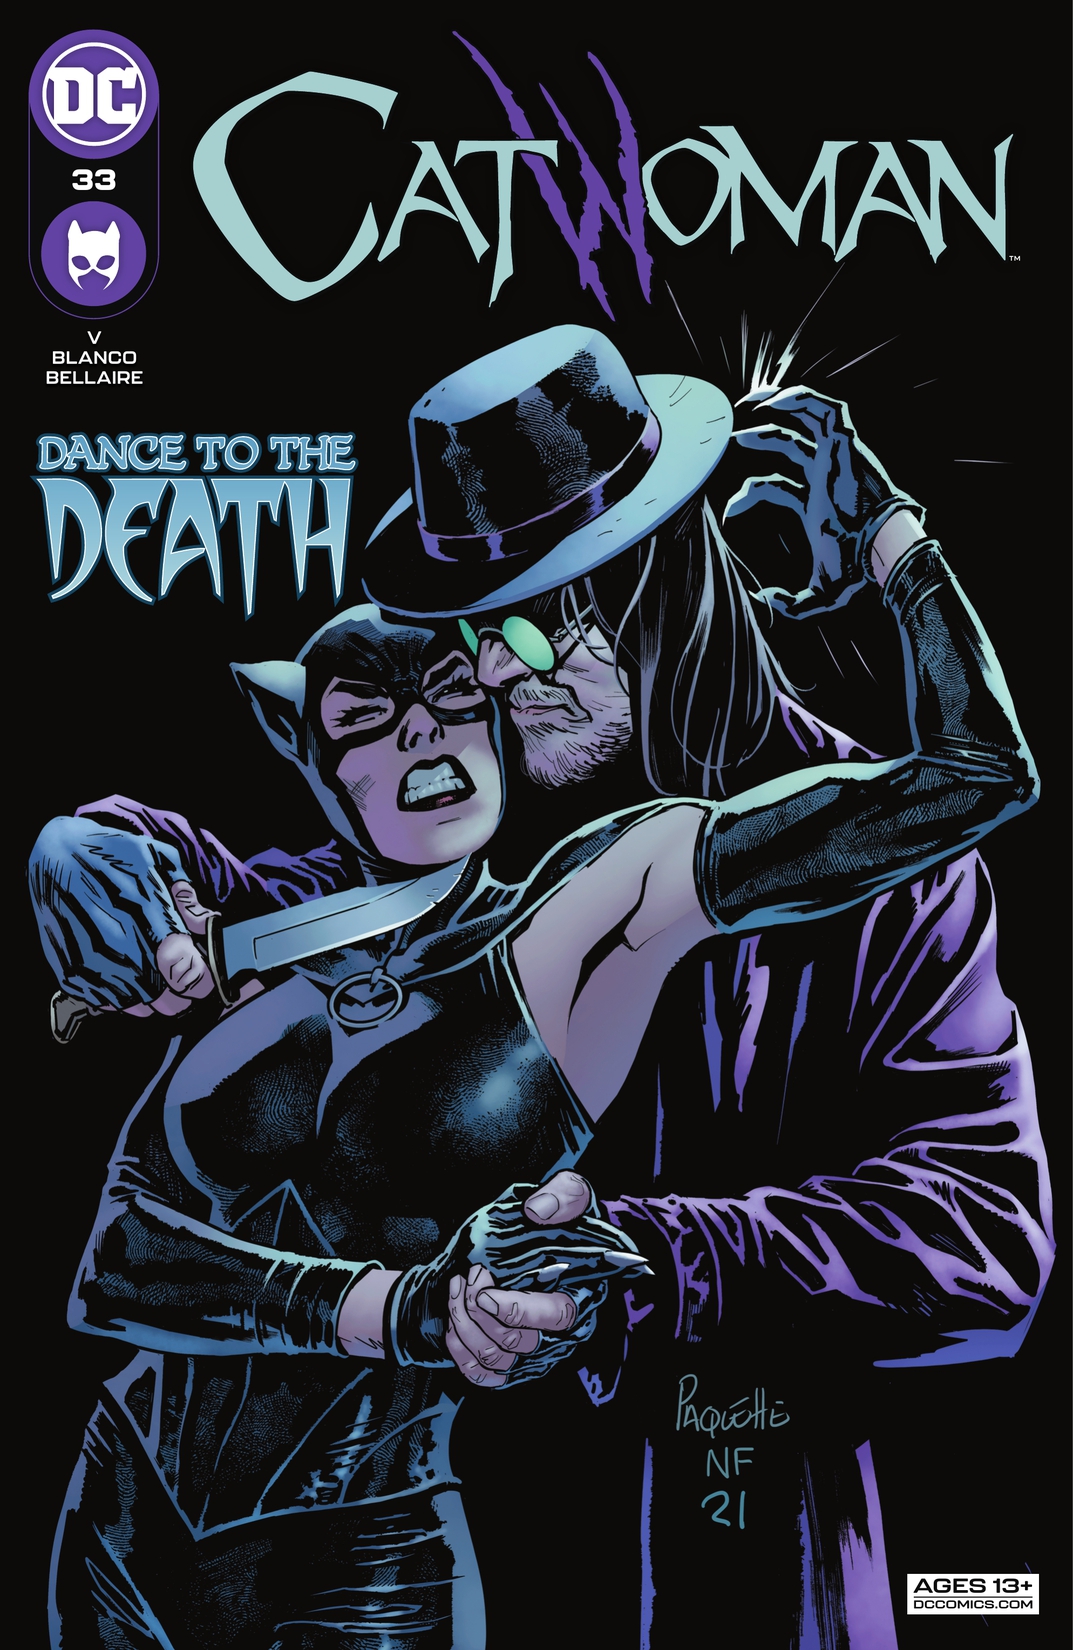 Catwoman (2018-) #33 preview images